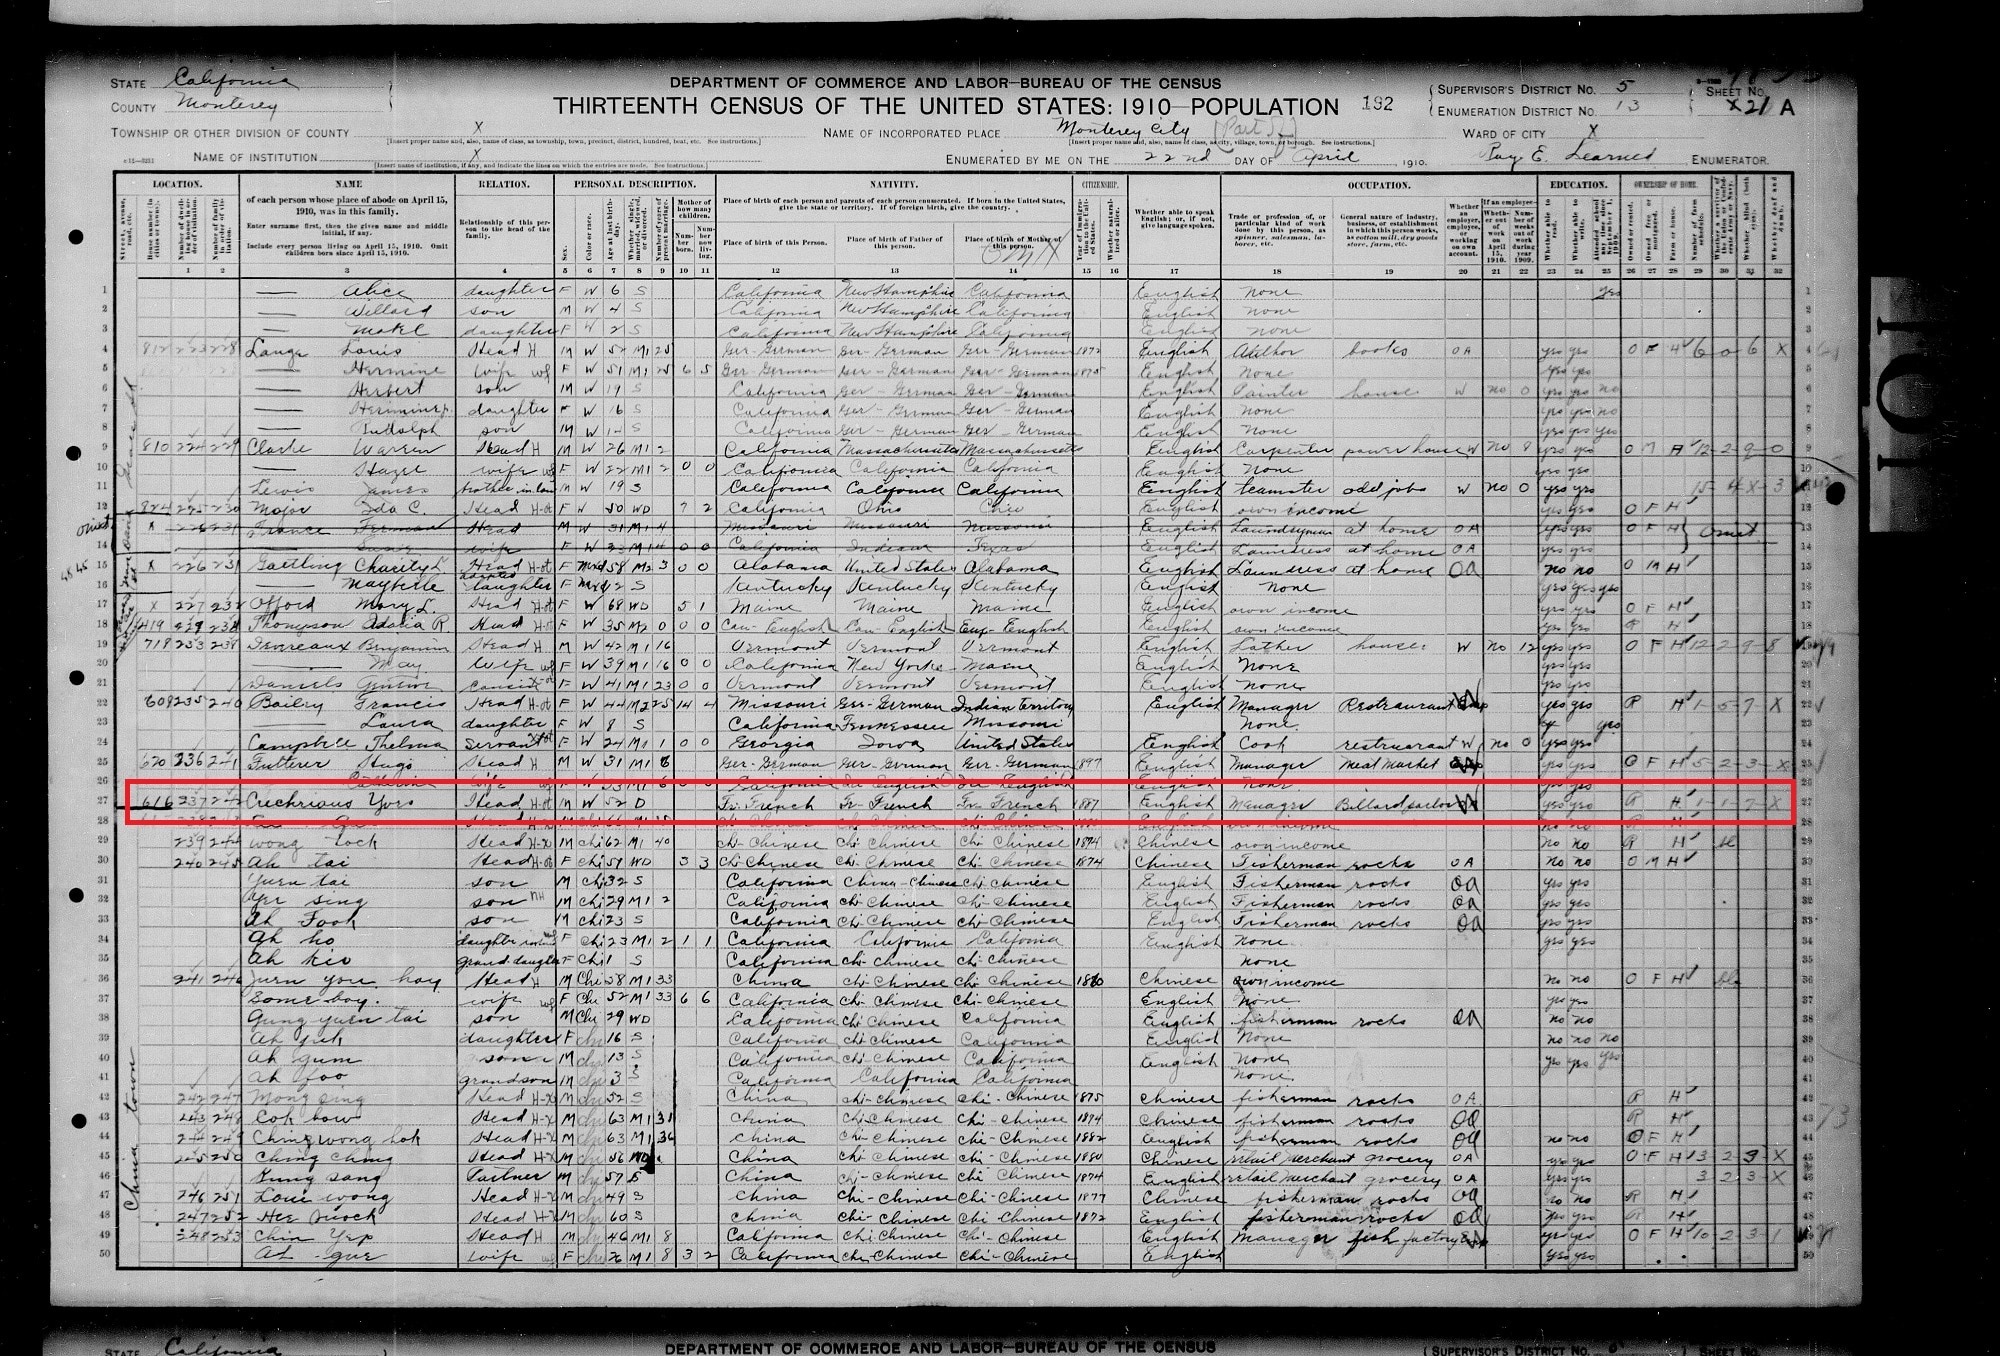 A 1910 U.S. Census record of Yves Chrechriou, which mentions that he manages a billiard factory